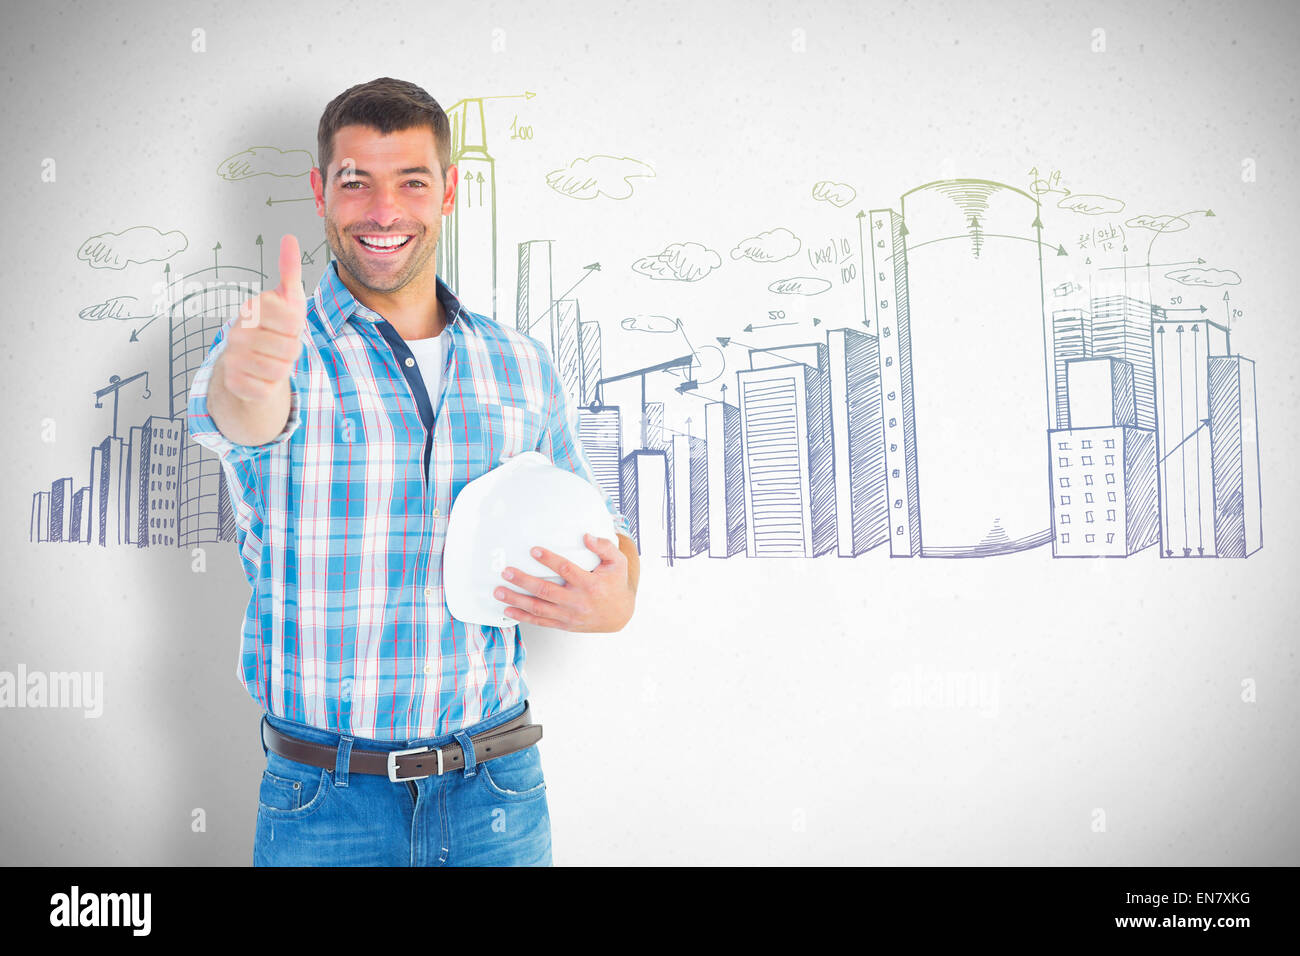 Composite image of confident manual worker gesturing thumbs up Stock Photo